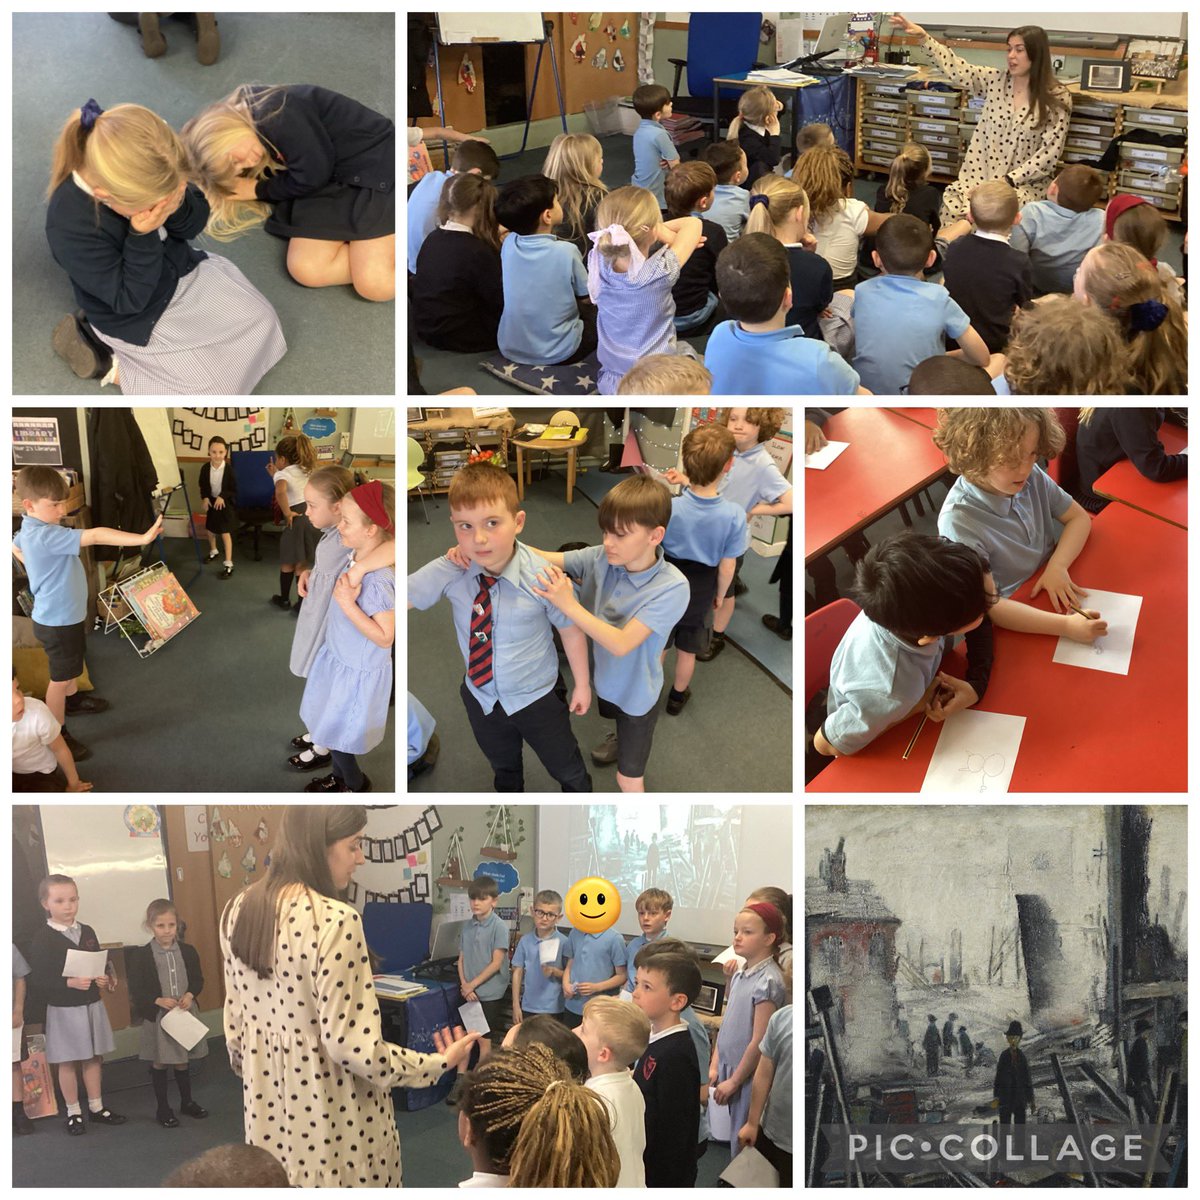 Y2 imagined themselves in Lowry’s ‘Blitzed Site’ and shared how they felt in that moment. We thought about what might have happened that we couldn’t see and as a class discussed our hopes for the future. @imagineinquiry #MantleoftheExpert